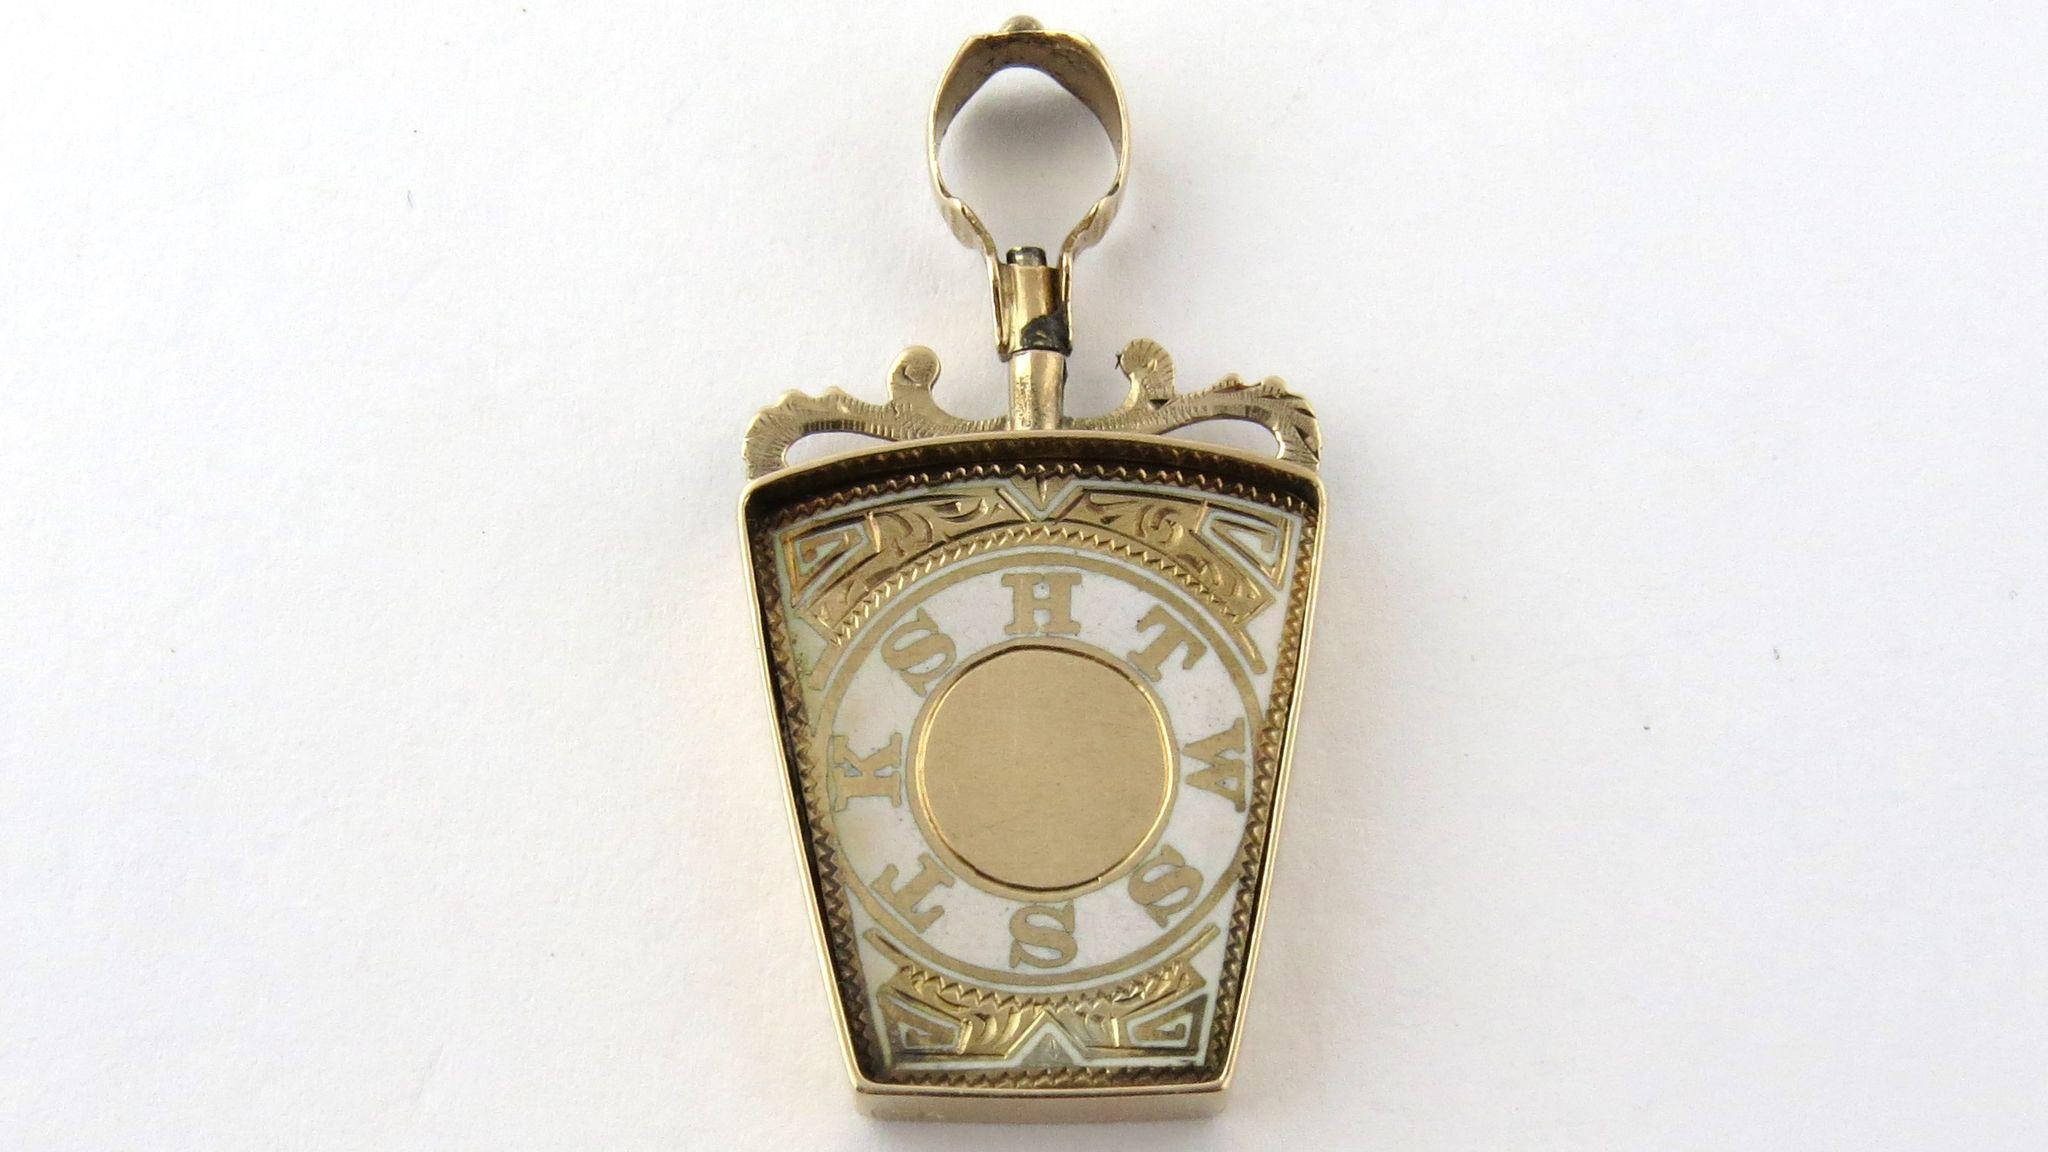 Vintage 10K Yellow Gold and White Enamel Masonic Royal Arch Keystone FOB 

This vintage piece has hand engraved details and bail screws on a base metal post which attaches it to the frame. The letters HTWSSTKS are gold engraved on the white enamel